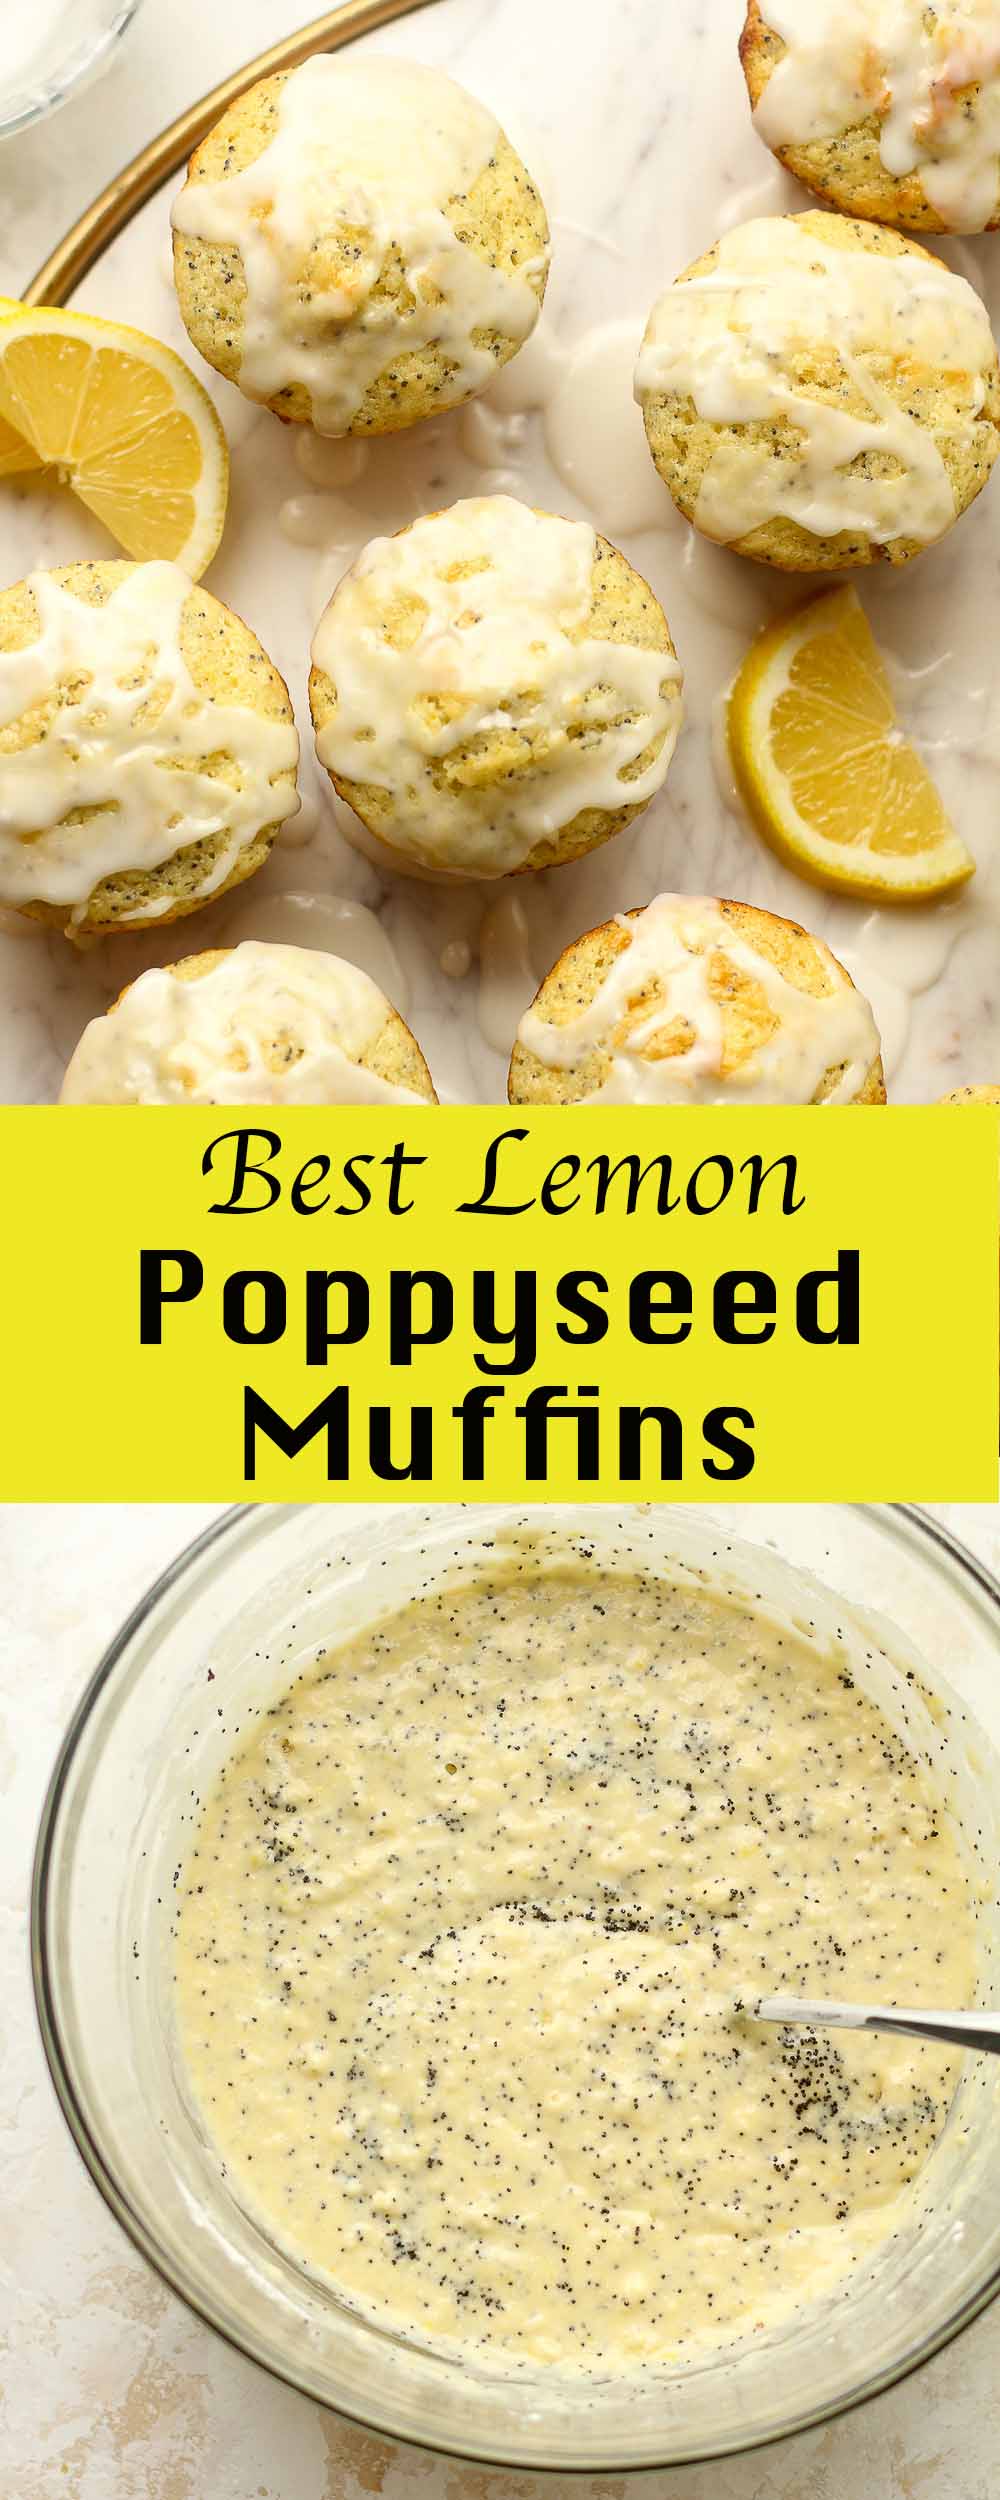 A collage of two photos of the best lemon poppyseed muffins.